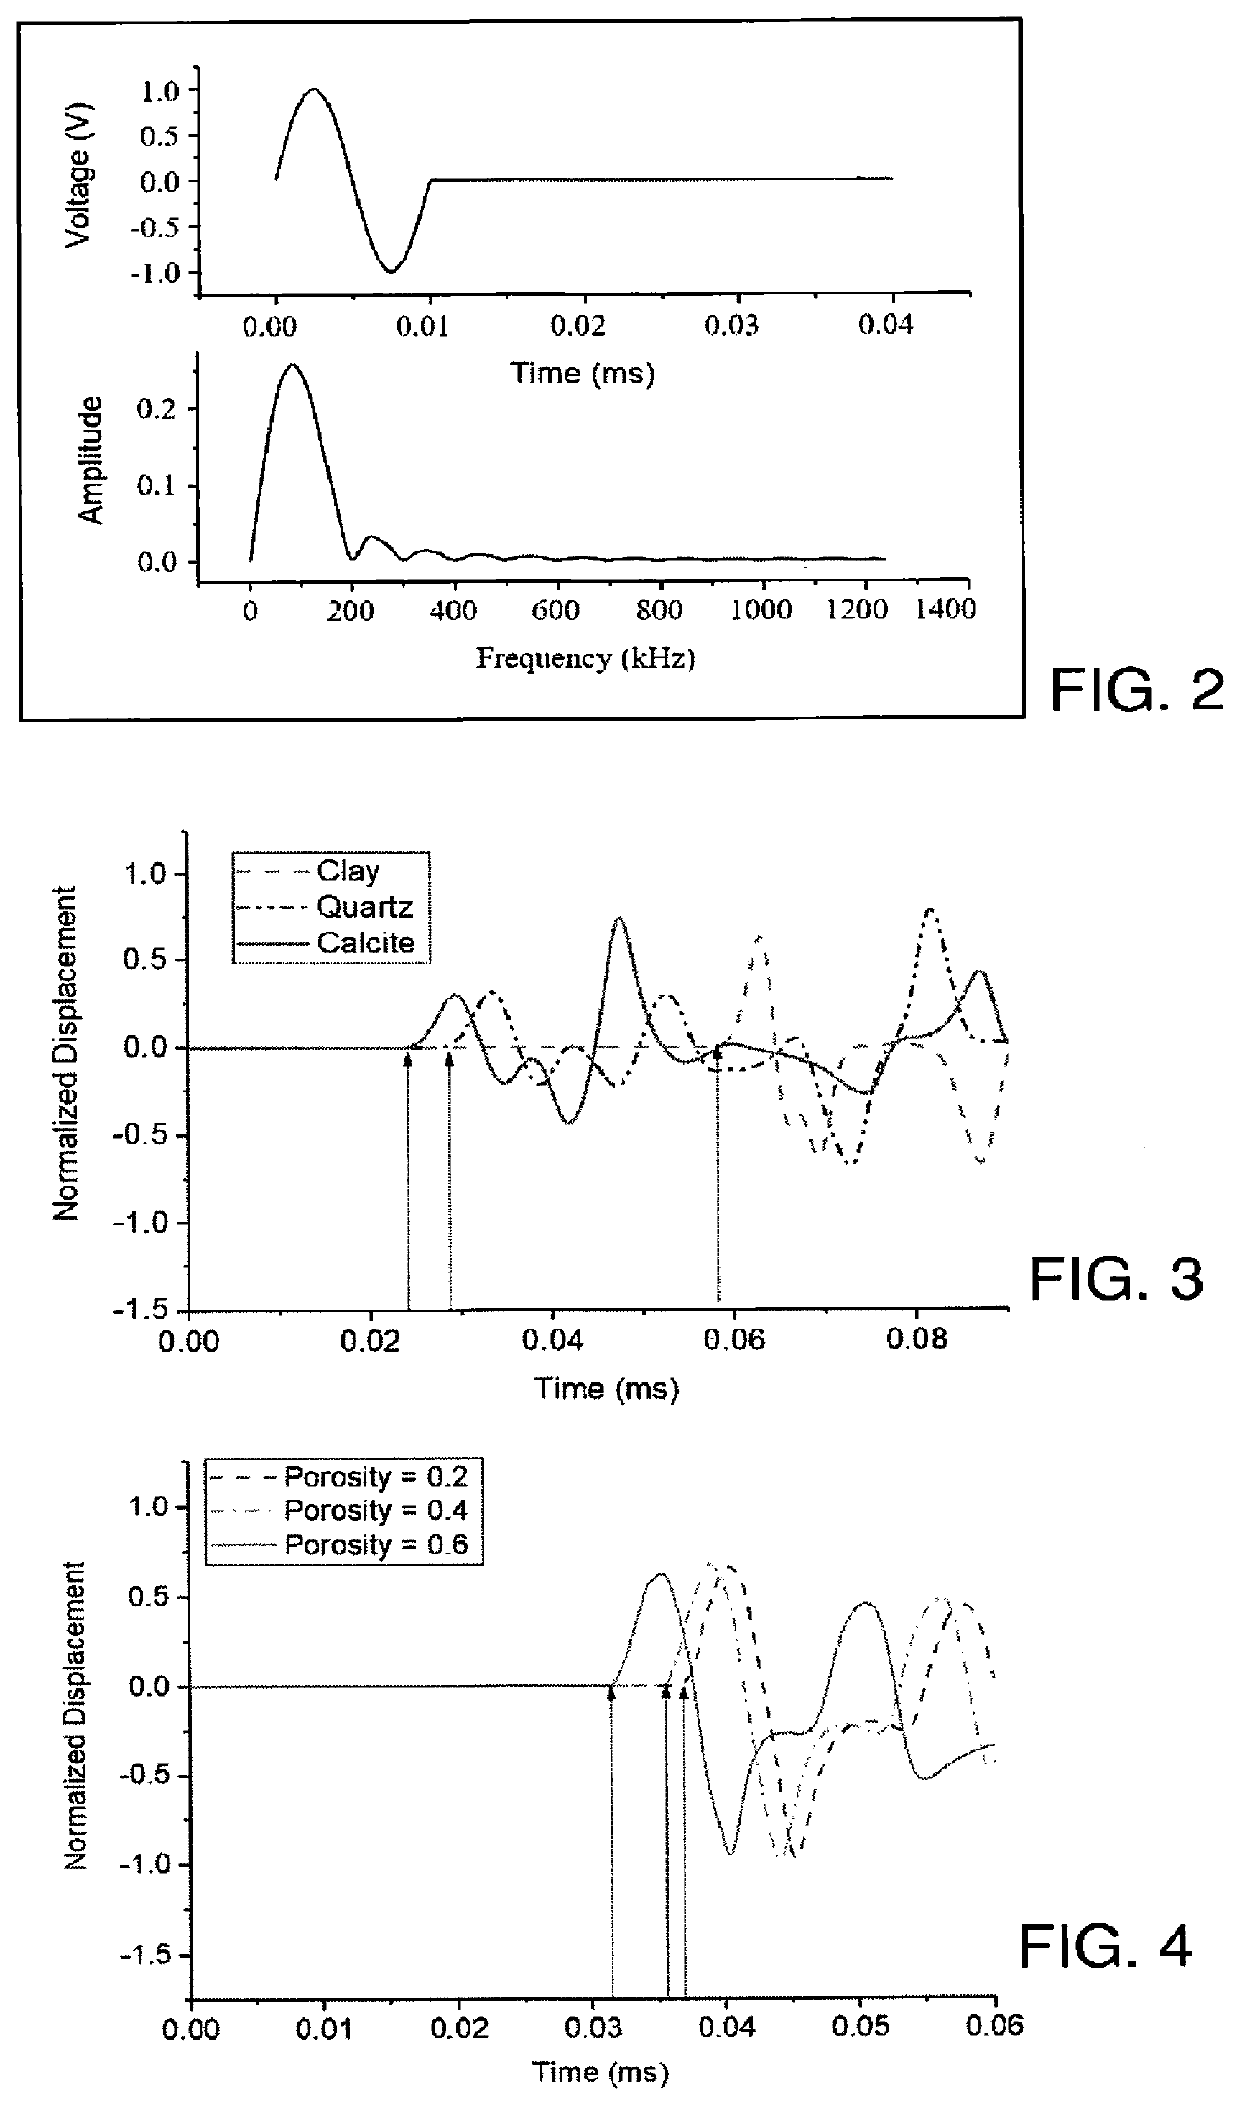 Systems and Methods for Ultrasonic Characterization of Permafrost, Frozen Soil and Saturated Soil Samples